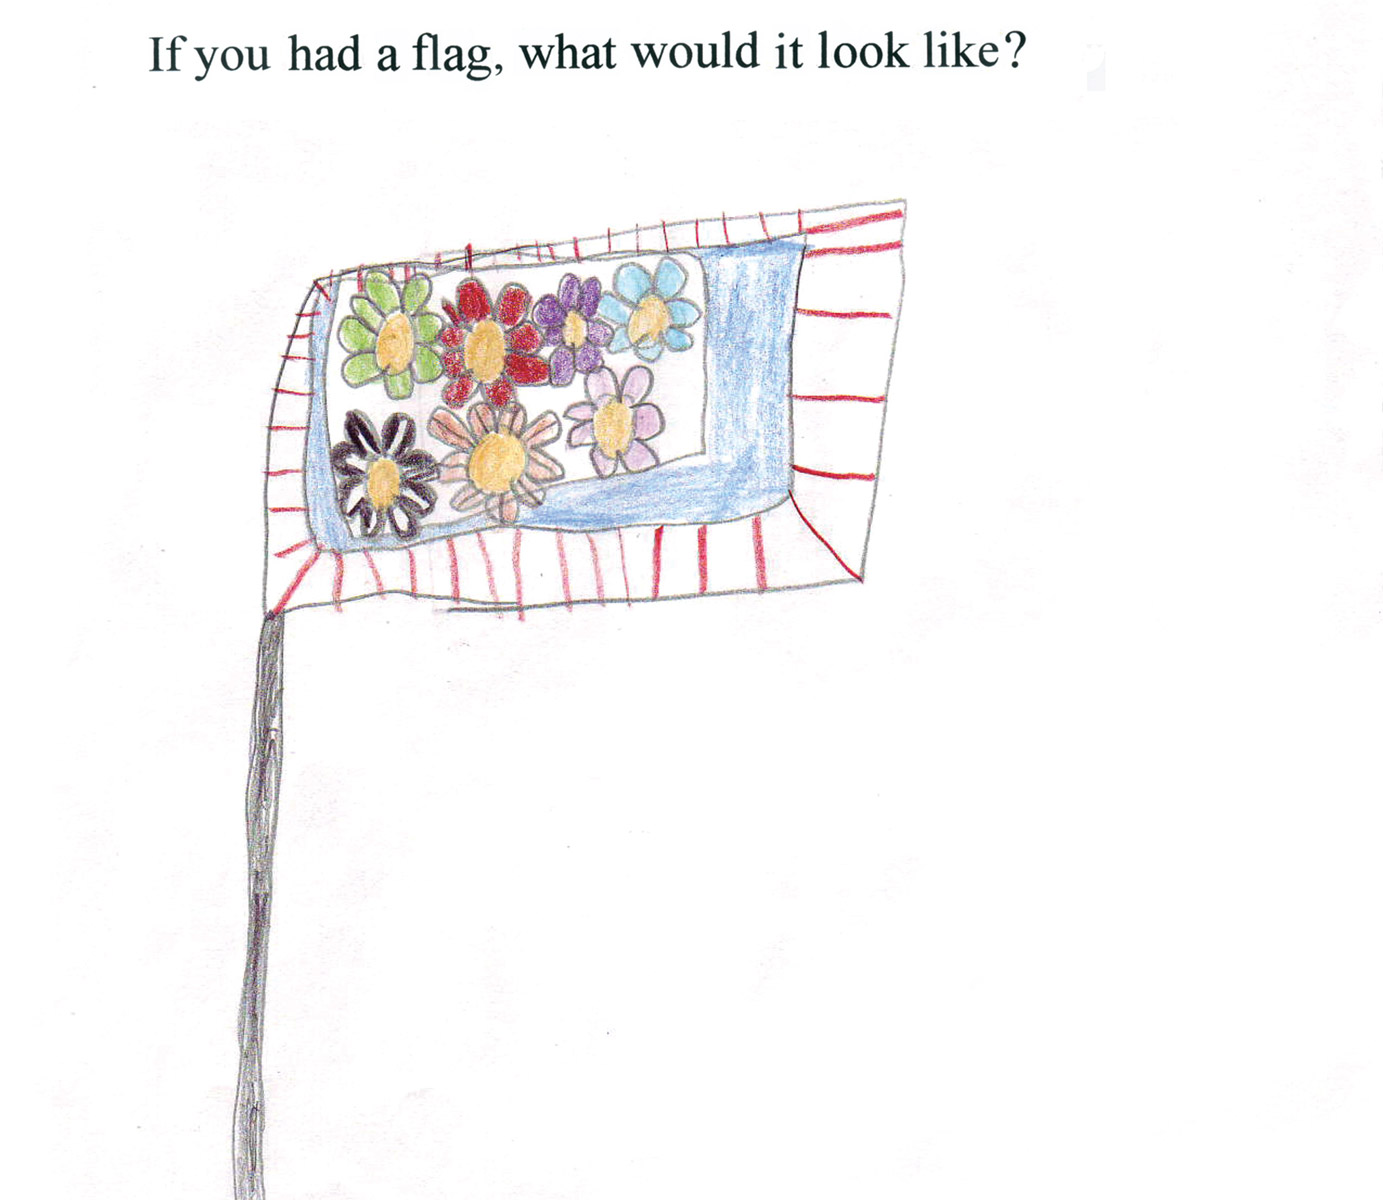 The second page from Daniel Handler’s questionnaire for his young fried Violet. Question. If you had a flag, what would it look like. Violet’s answers consists of a drawing of a flag with flowers on it.